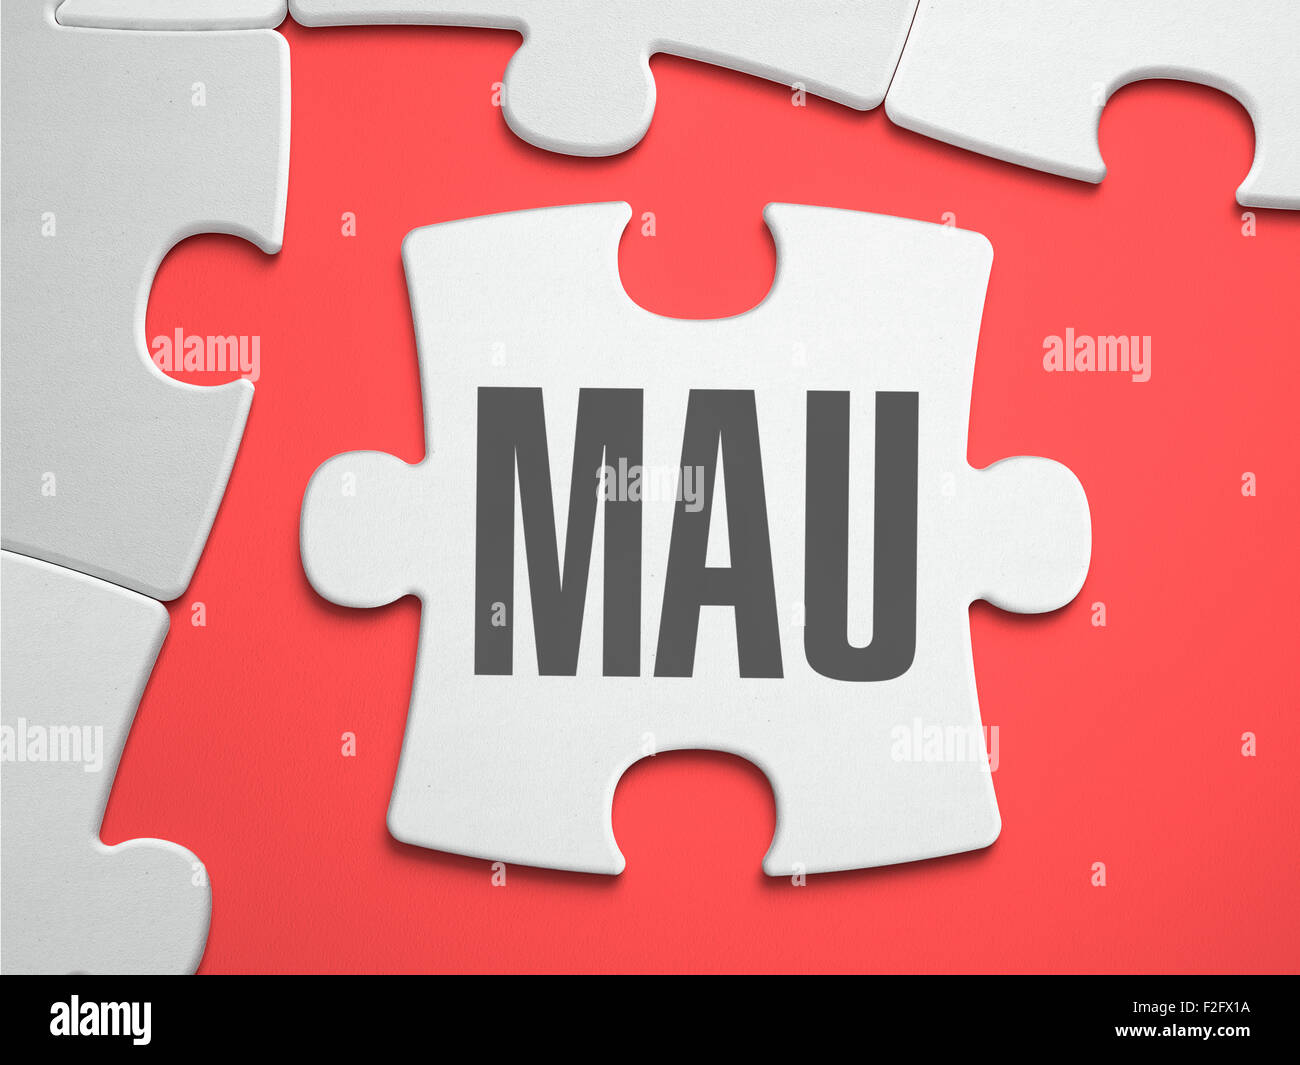 MAU - Monthly Active Users - Text on Puzzle on the Place of Missing Pieces. Scarlett Background. Close-up. 3d Illustration. Stock Photo